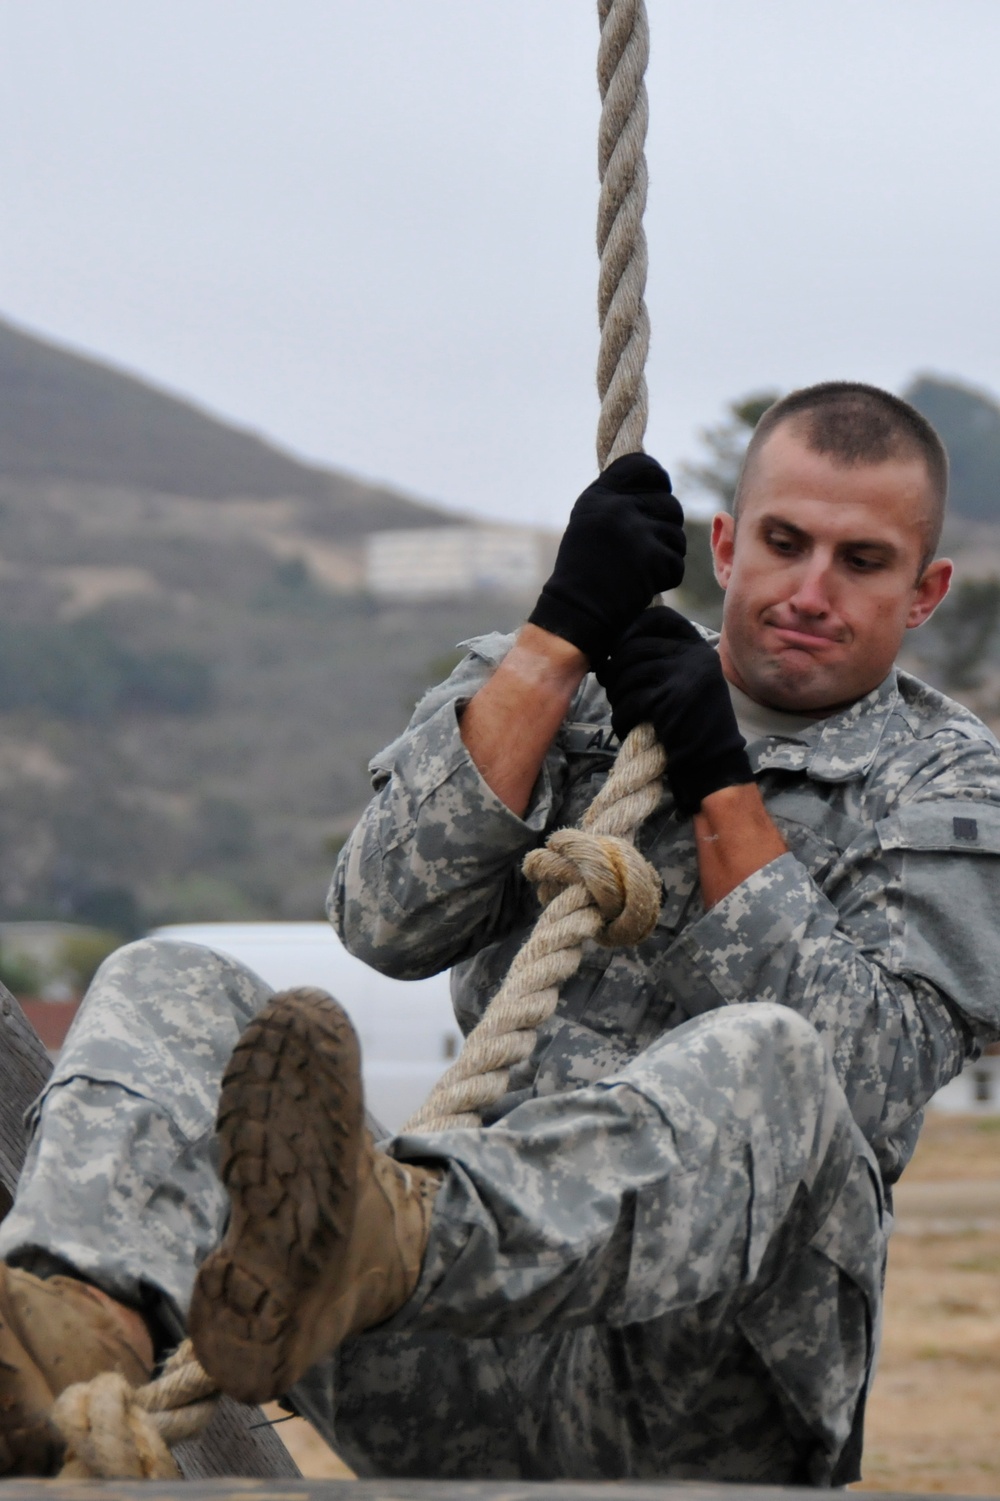 California National Guard soldiers compete to become the 2011 Best Warrior